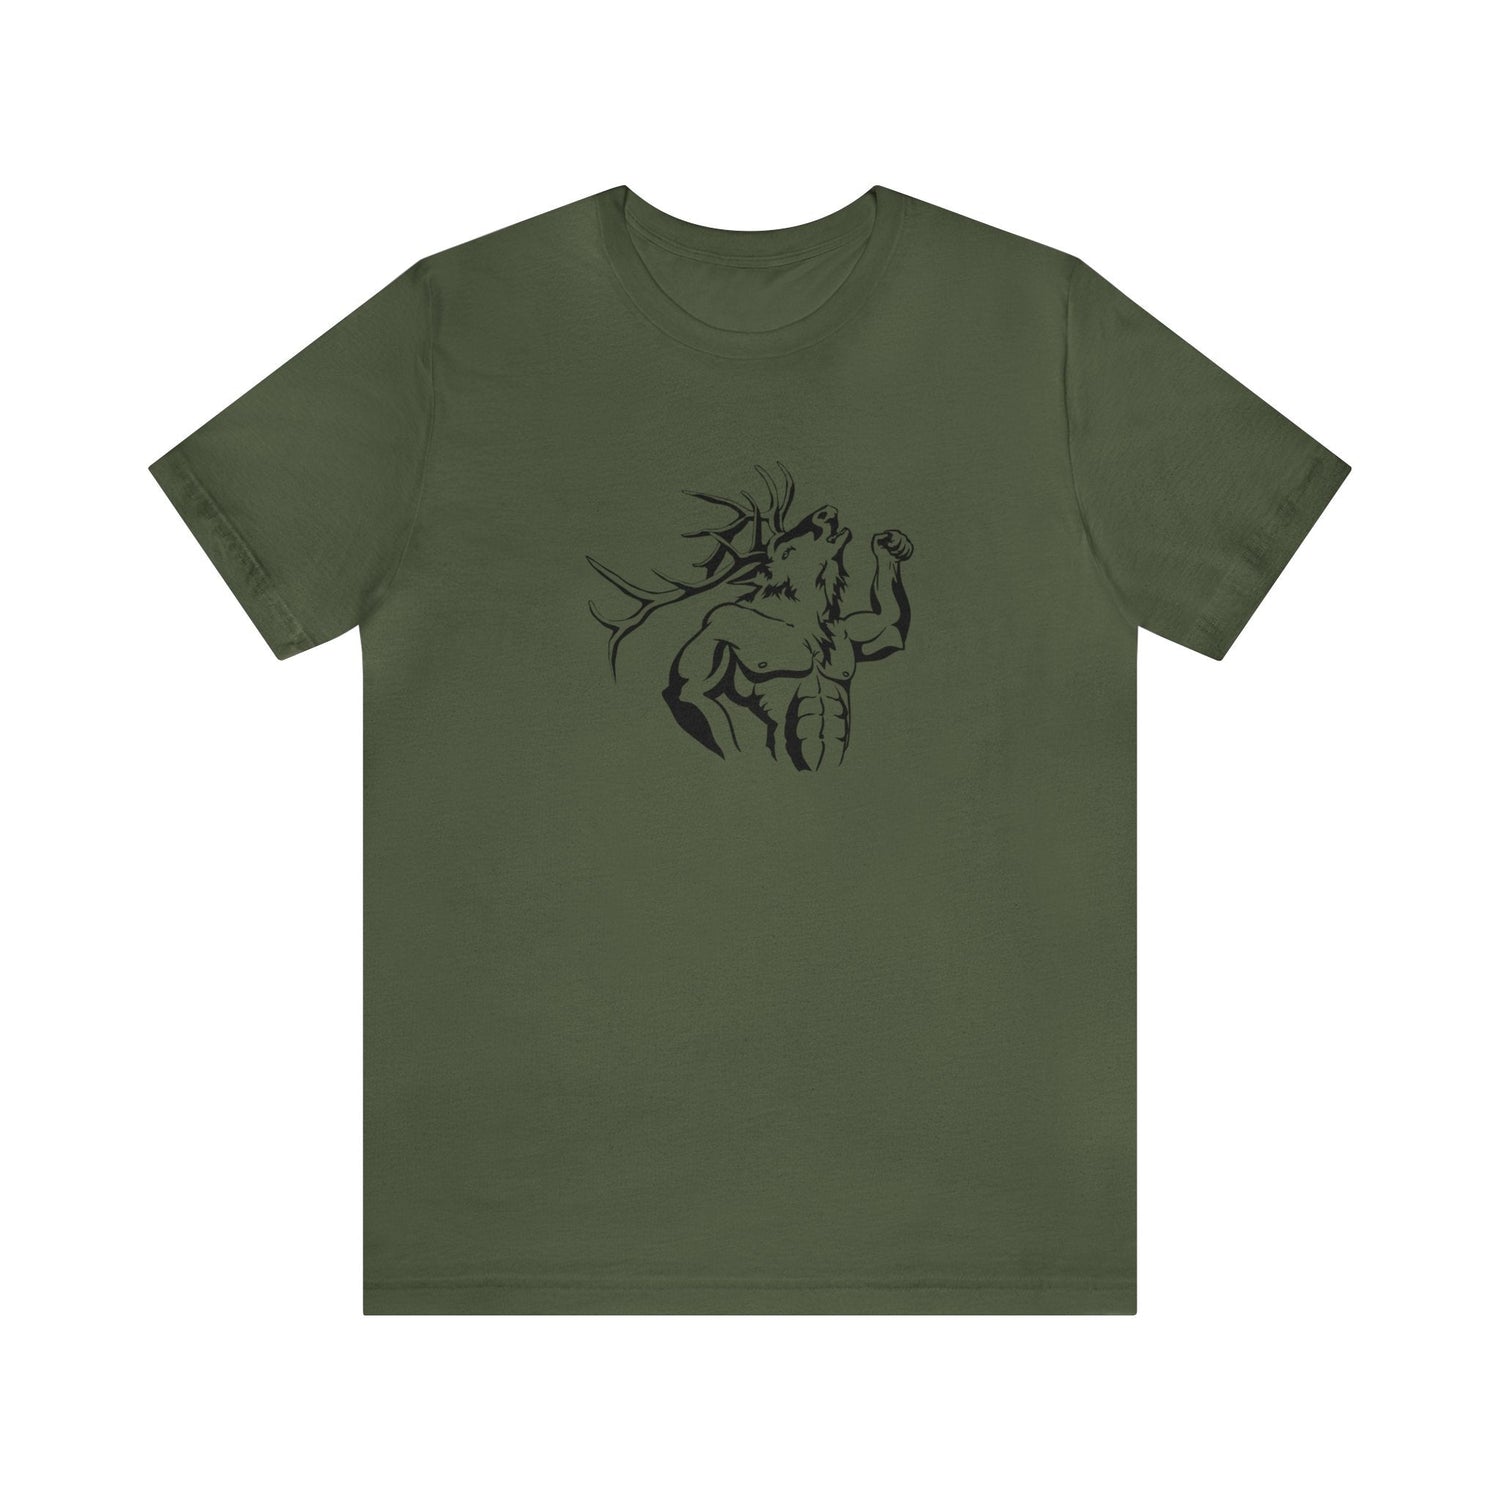 Western elk hunting t-shirt, color military green, front design placement